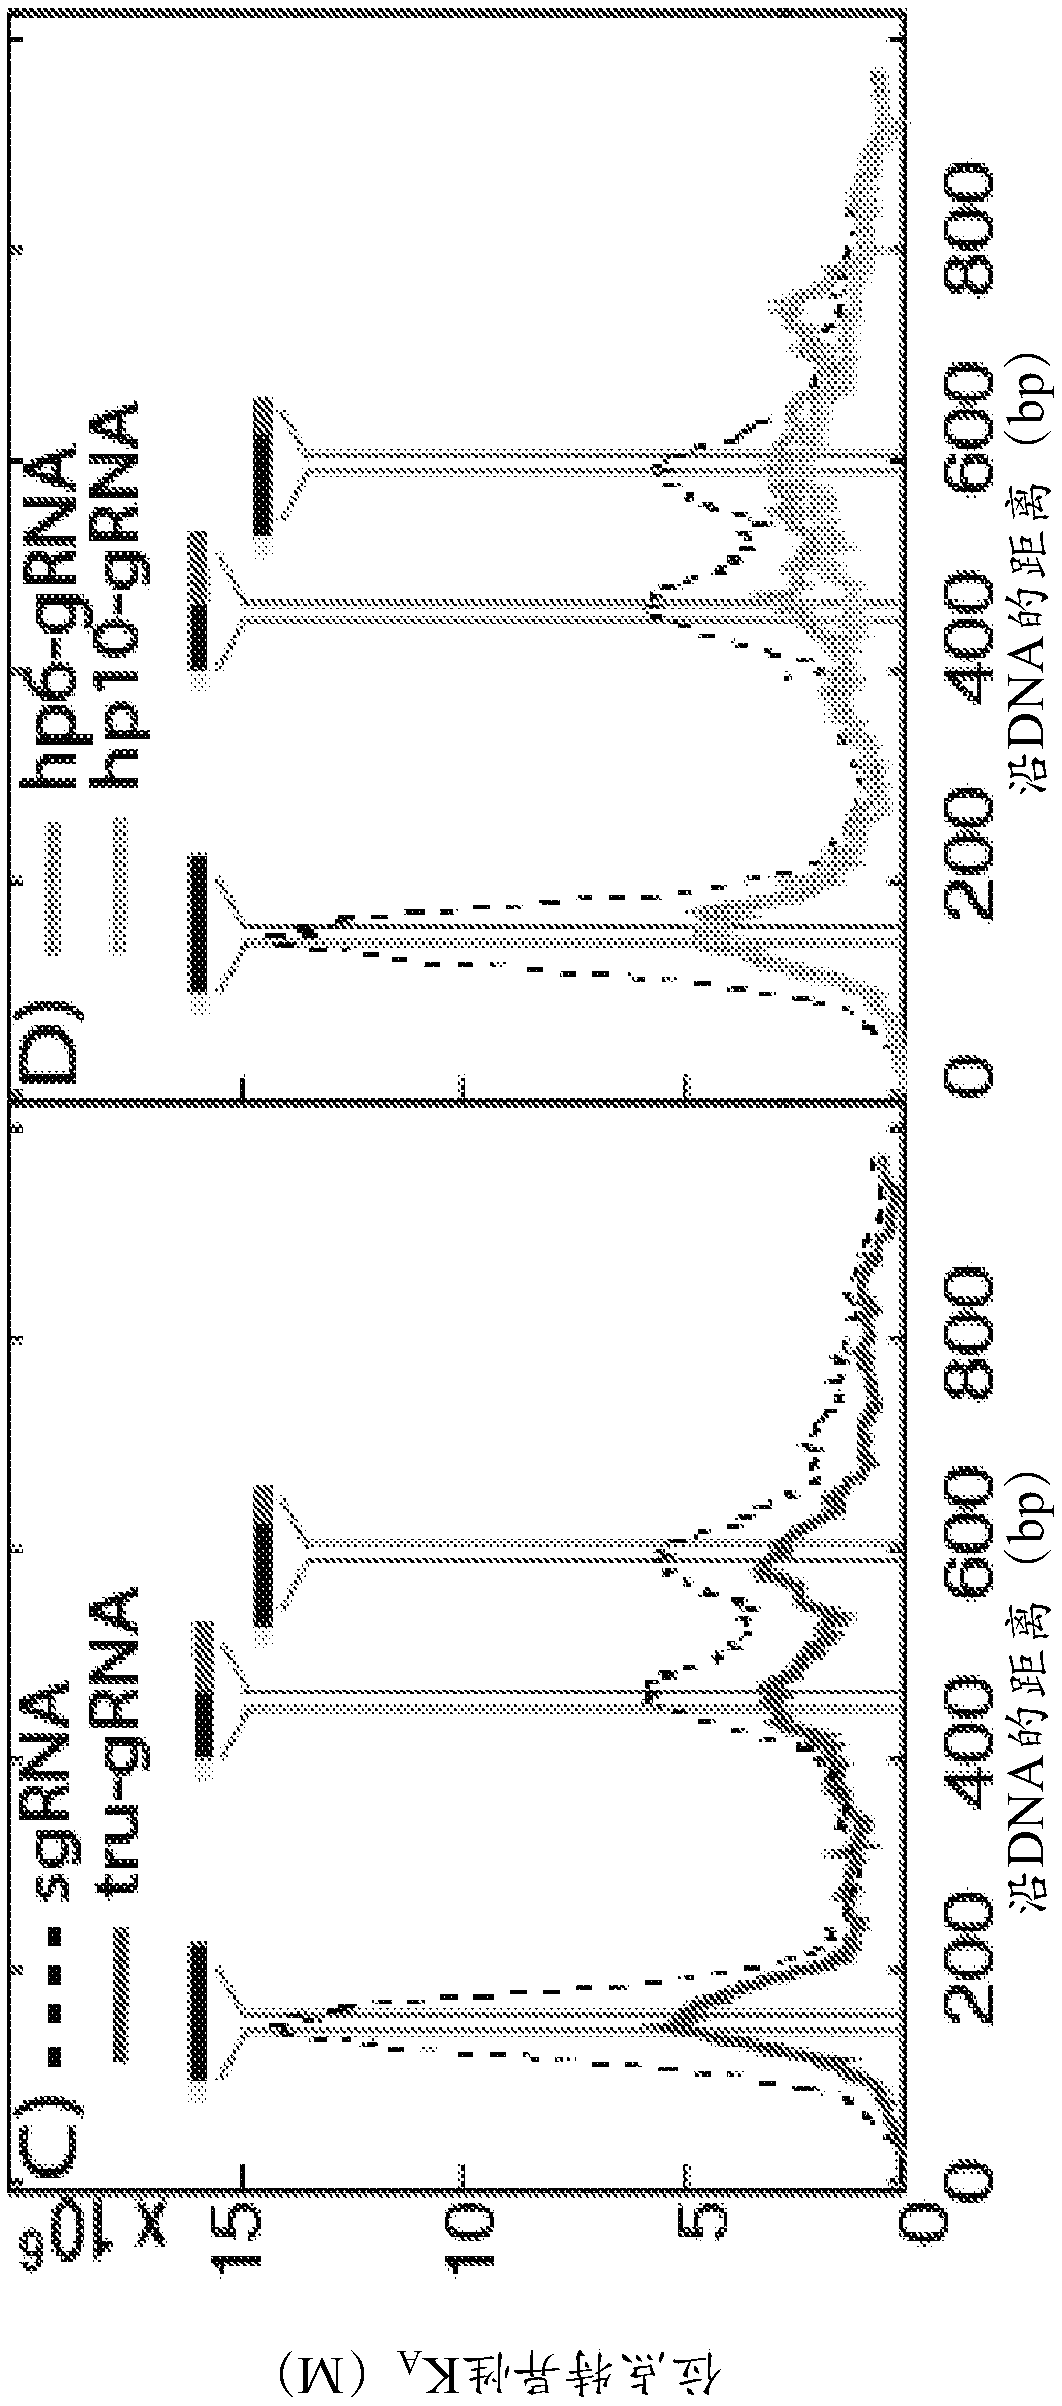 Compositions and methods of improving specificity in genomic engineering using rna-guided endonucleases